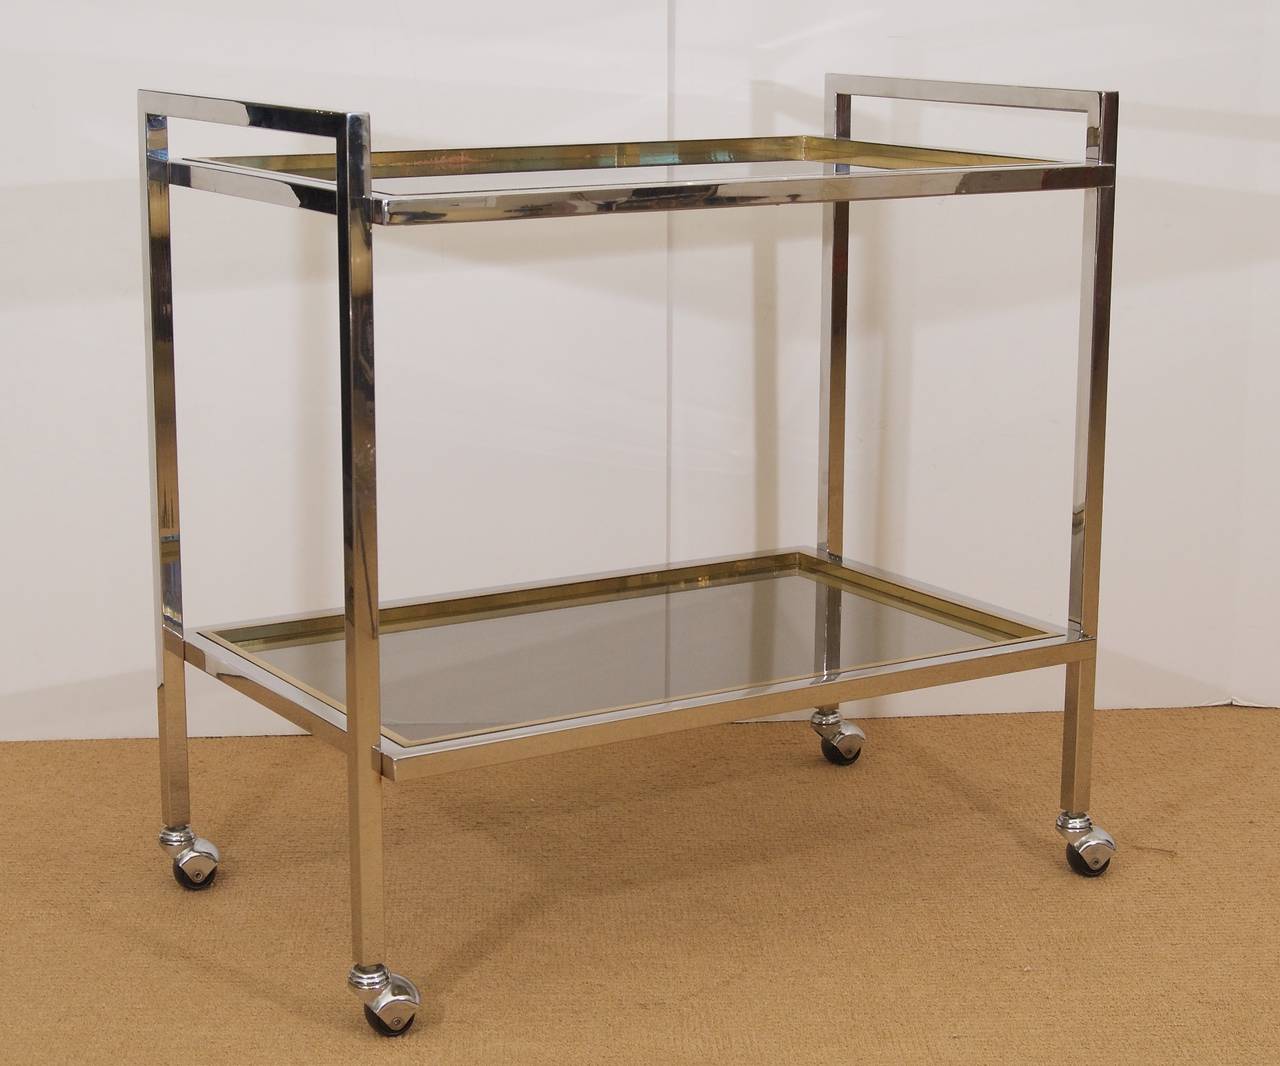 Two-tiered brass and chrome bar cart with inset smoked glass tiers, attributed to Romeo Rega. The clean lines and exquisite proportions of this piece add elegance to any space.